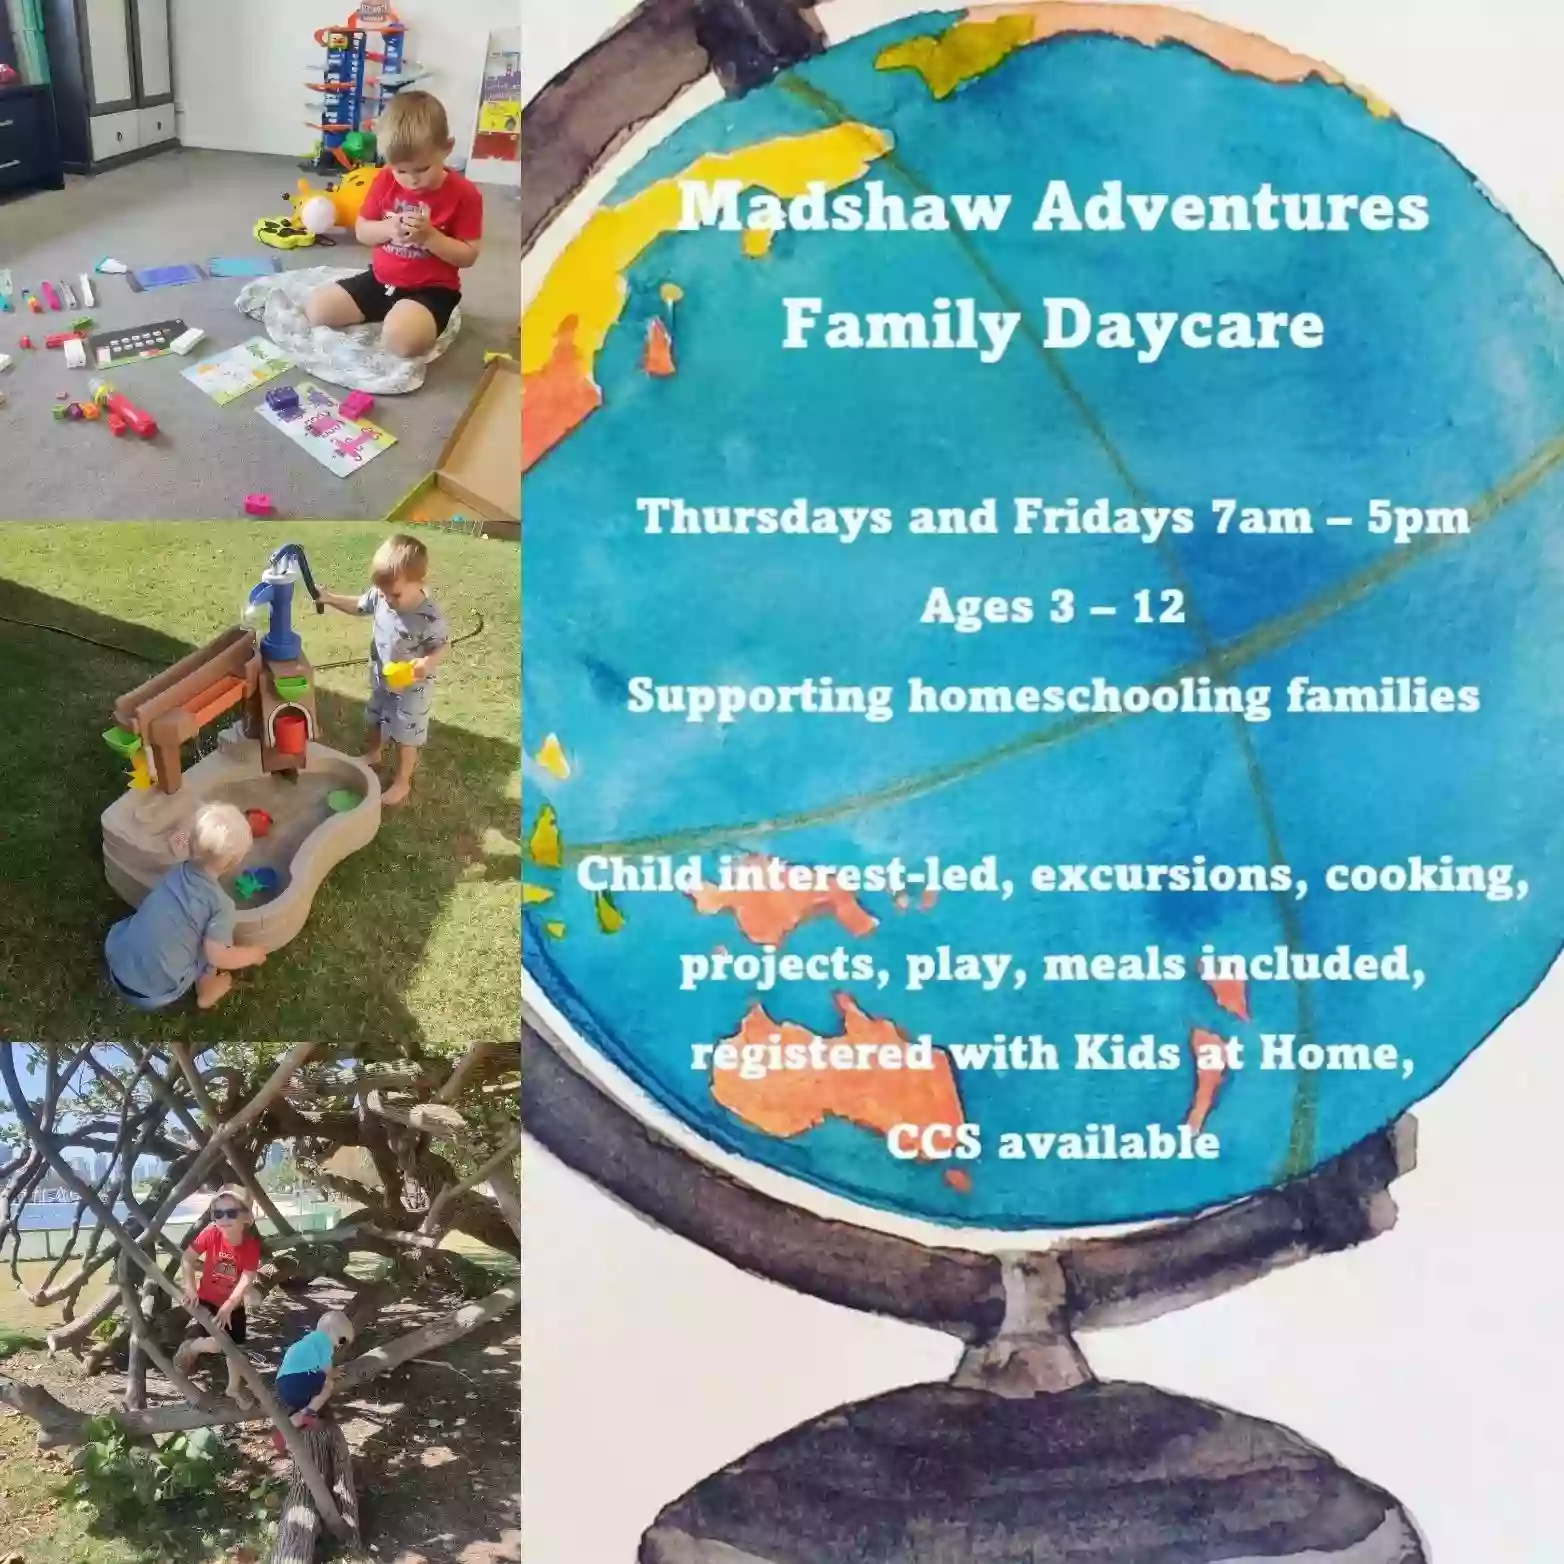 Madshaw Adventures Family Daycare